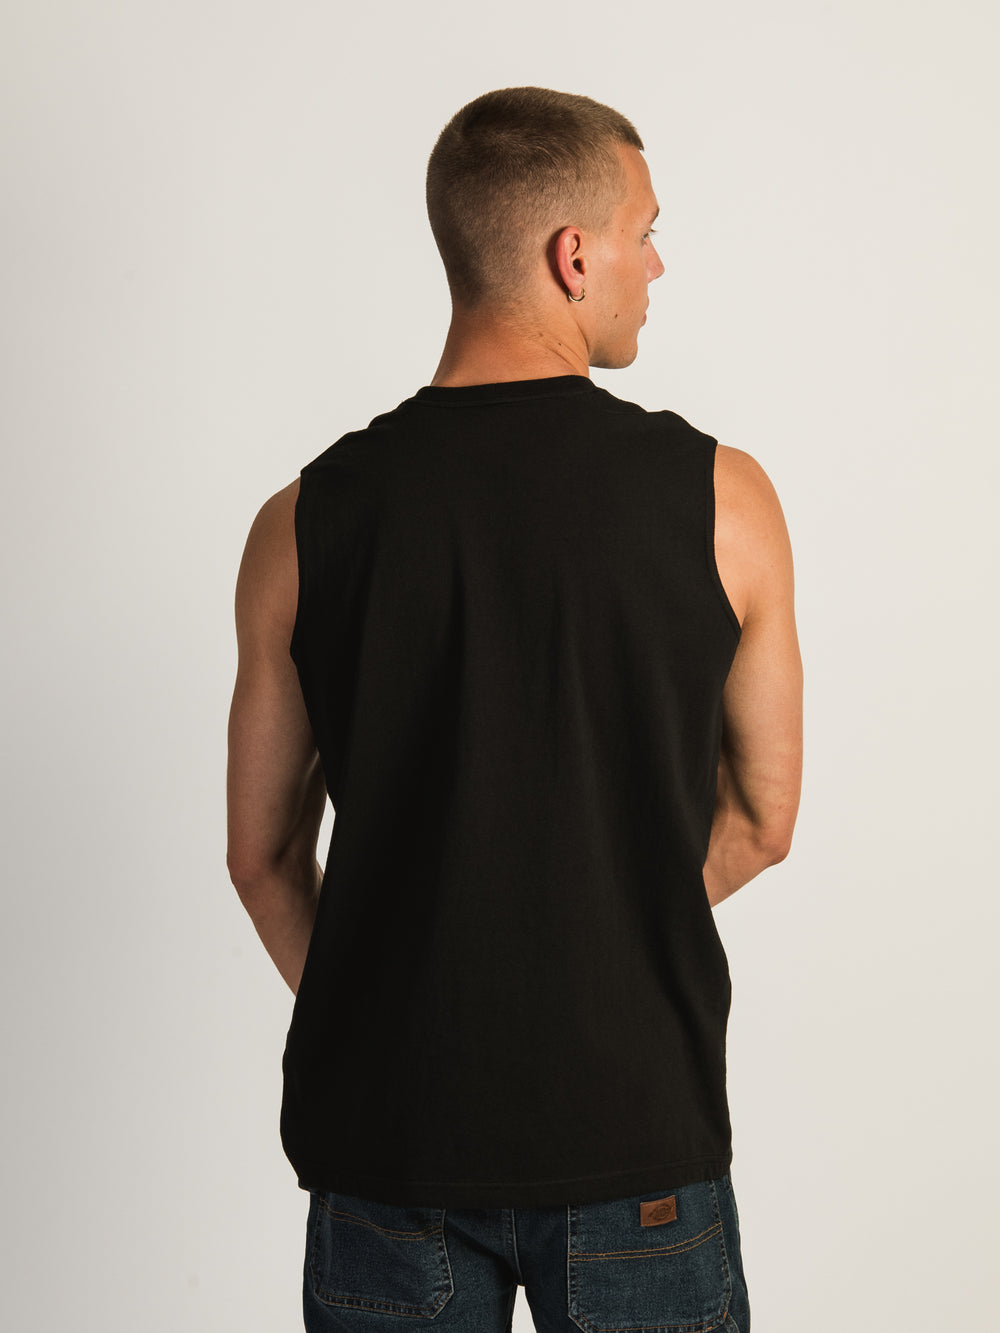 CARHARTT RELAXED FIT POCKET TANK TOP